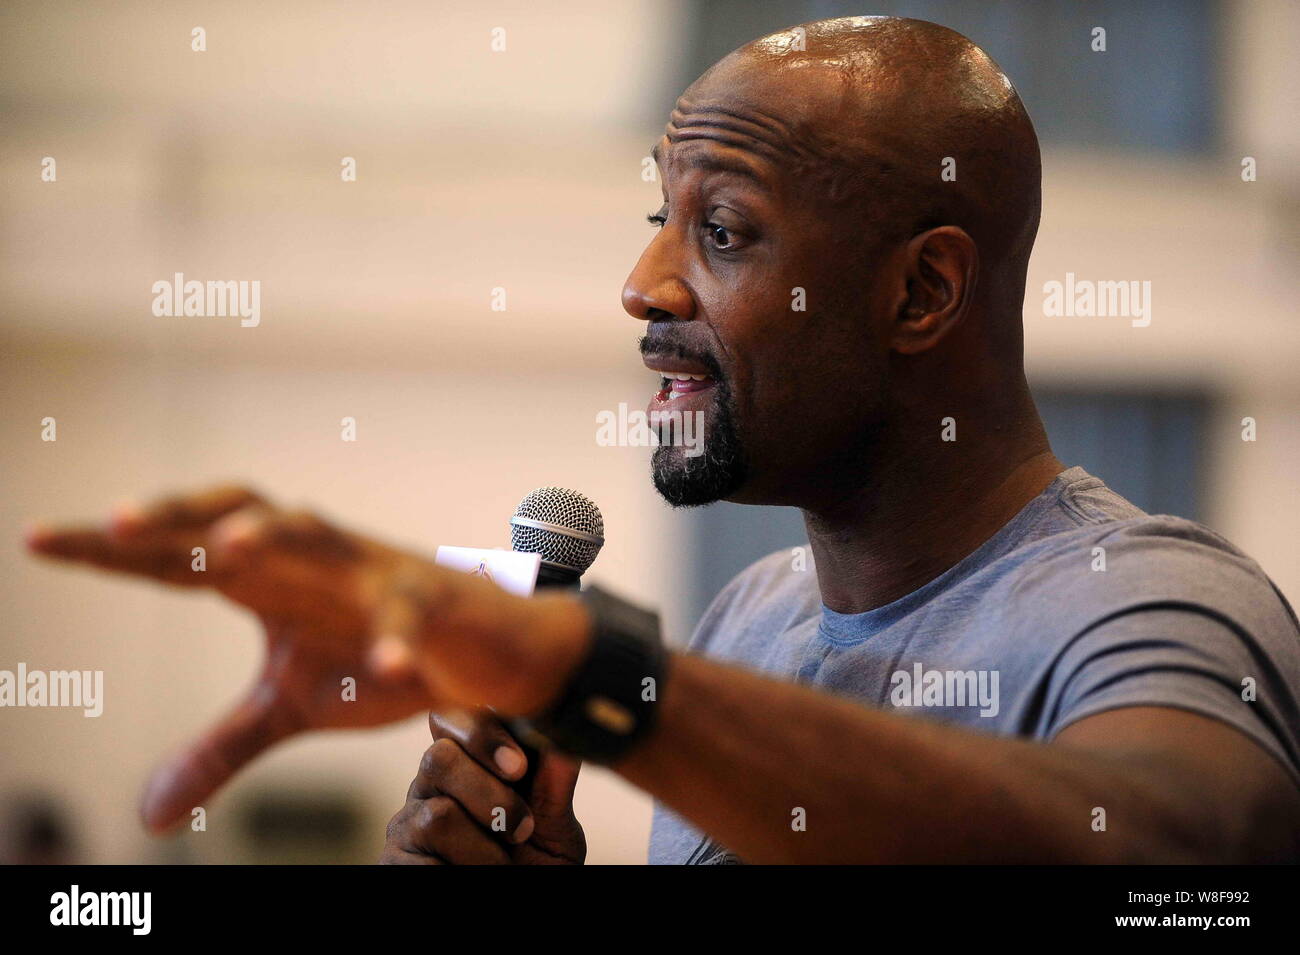 NBA Miami Heat star basketball player Alonzo Mourning arrives at the BBF  (Broker Boxing Federation) Miami at Mansion nighclub Stock Photo - Alamy